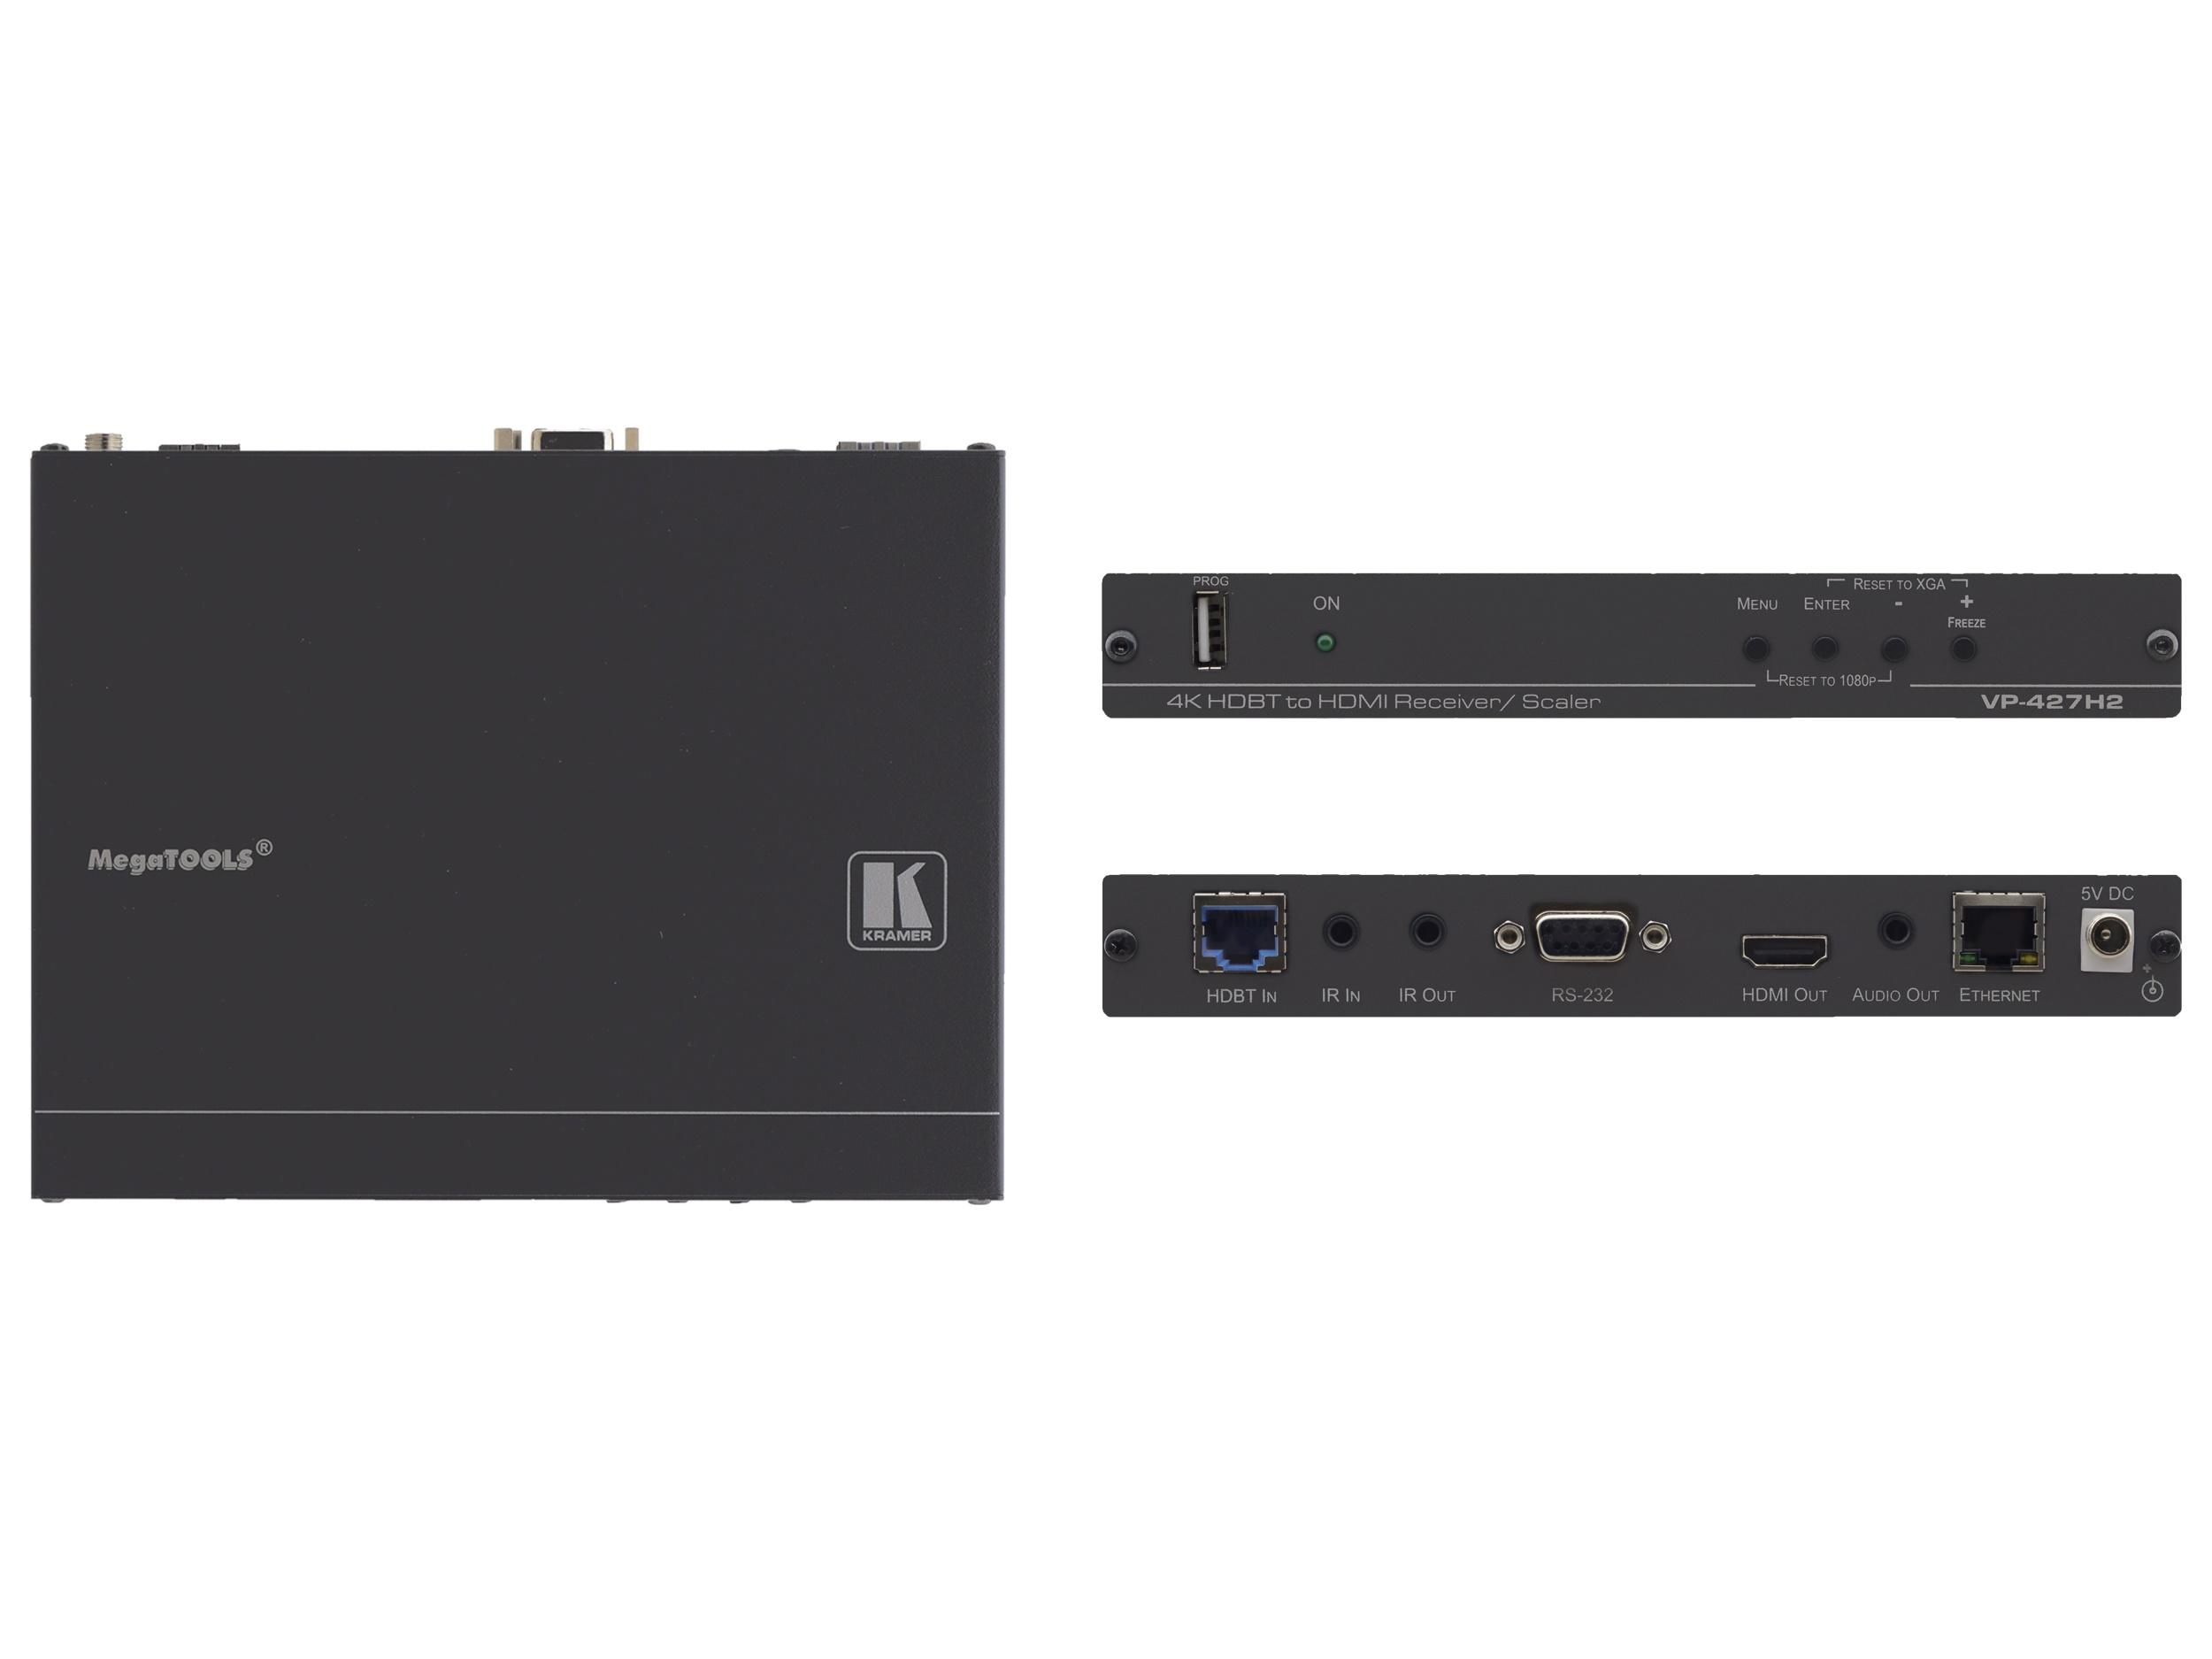 VP-427H2 4K60 4x4x4 HDMI HDCP 2.2 Receiver/Scaler with Ethernet/RS-232/IR/Stereo Audio by Kramer